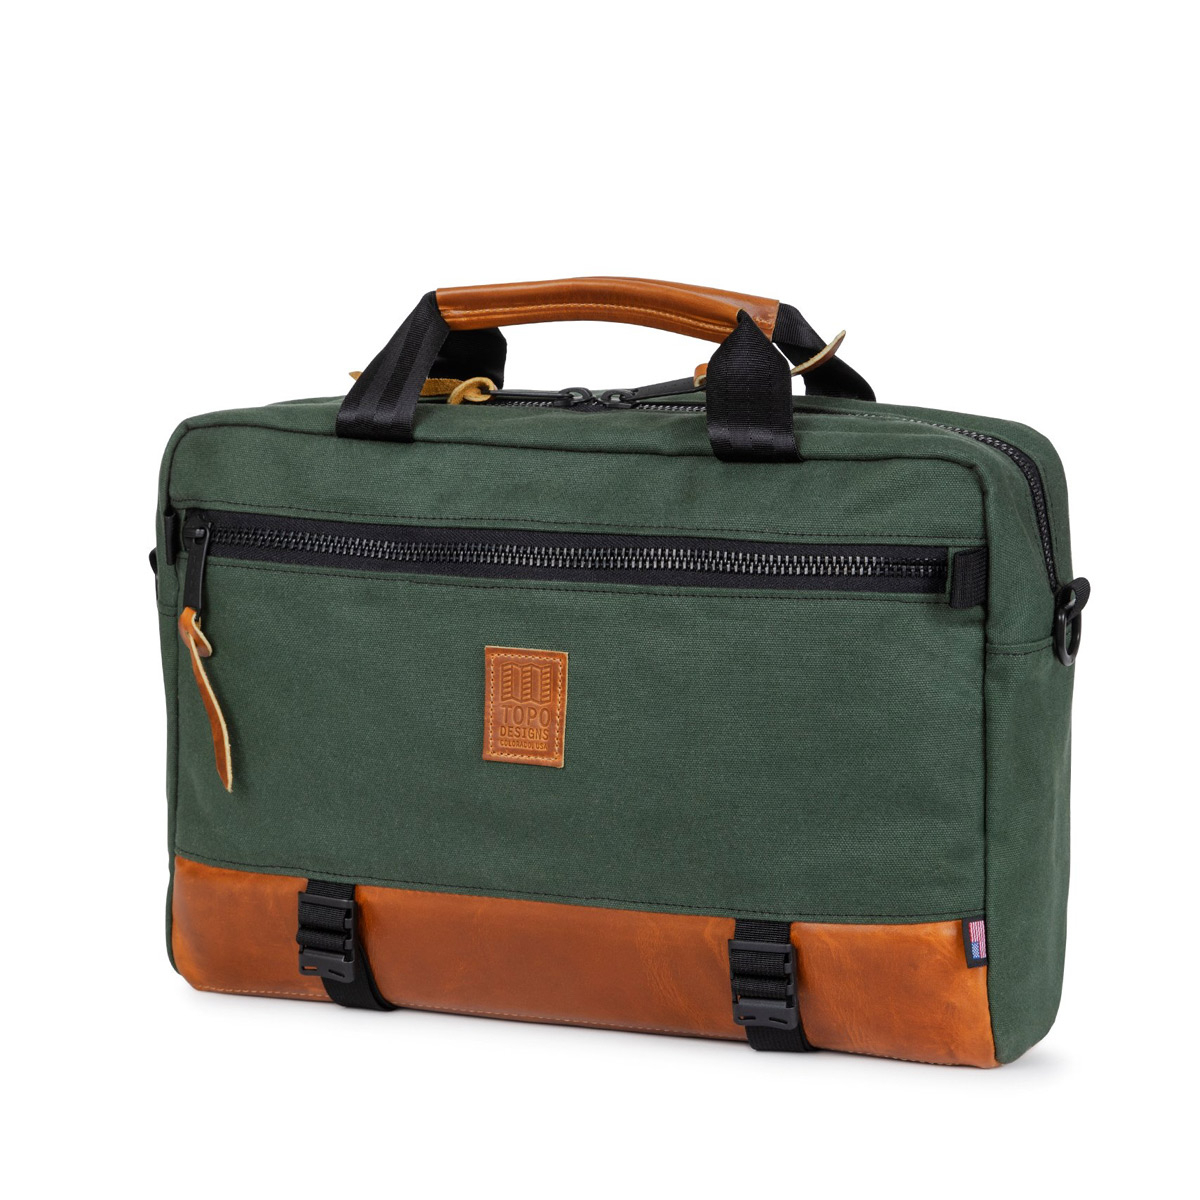 Topo Designs Commuter Briefcase Heritage Olive Canvas/Brown Leather